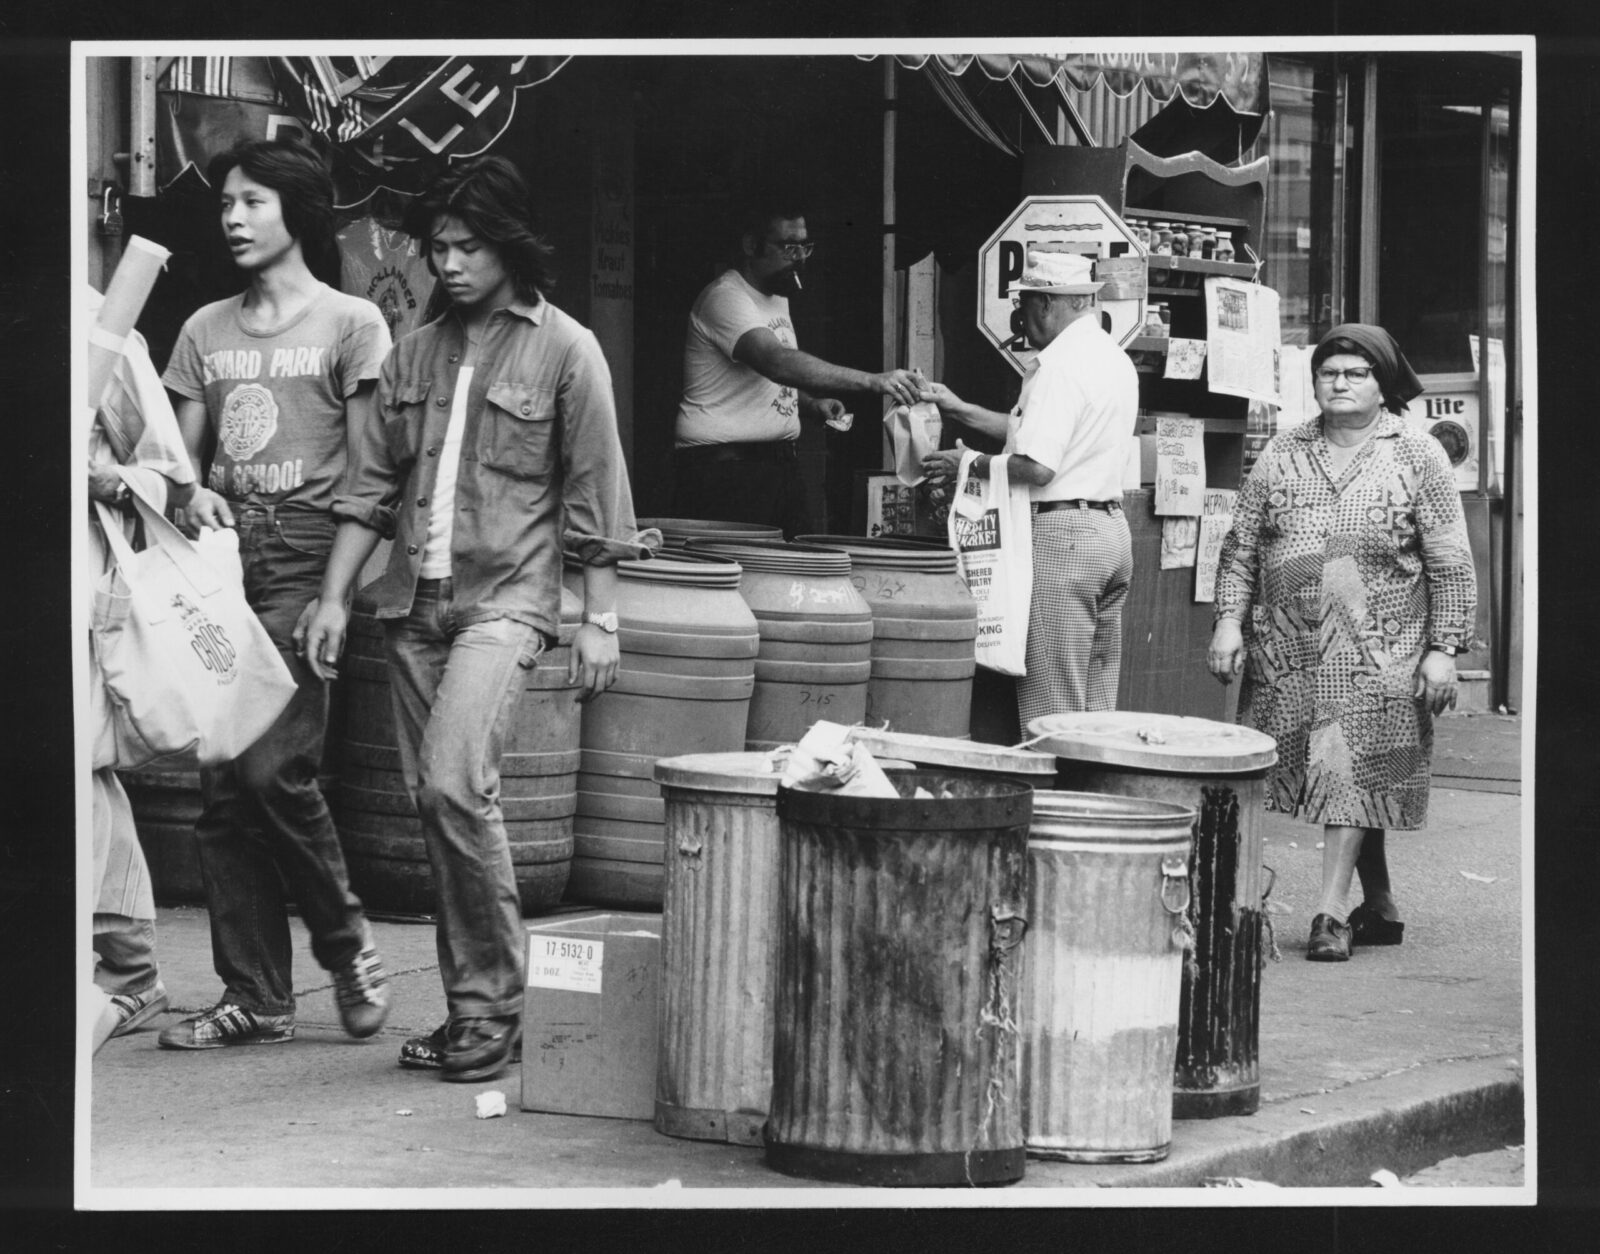 Black and white photo of the sidewalk in front of L. Hollander and Sons pickle shop. Two young adults walk past an older adult picking up a purchase on a street lined with trash bins and pickle barrels